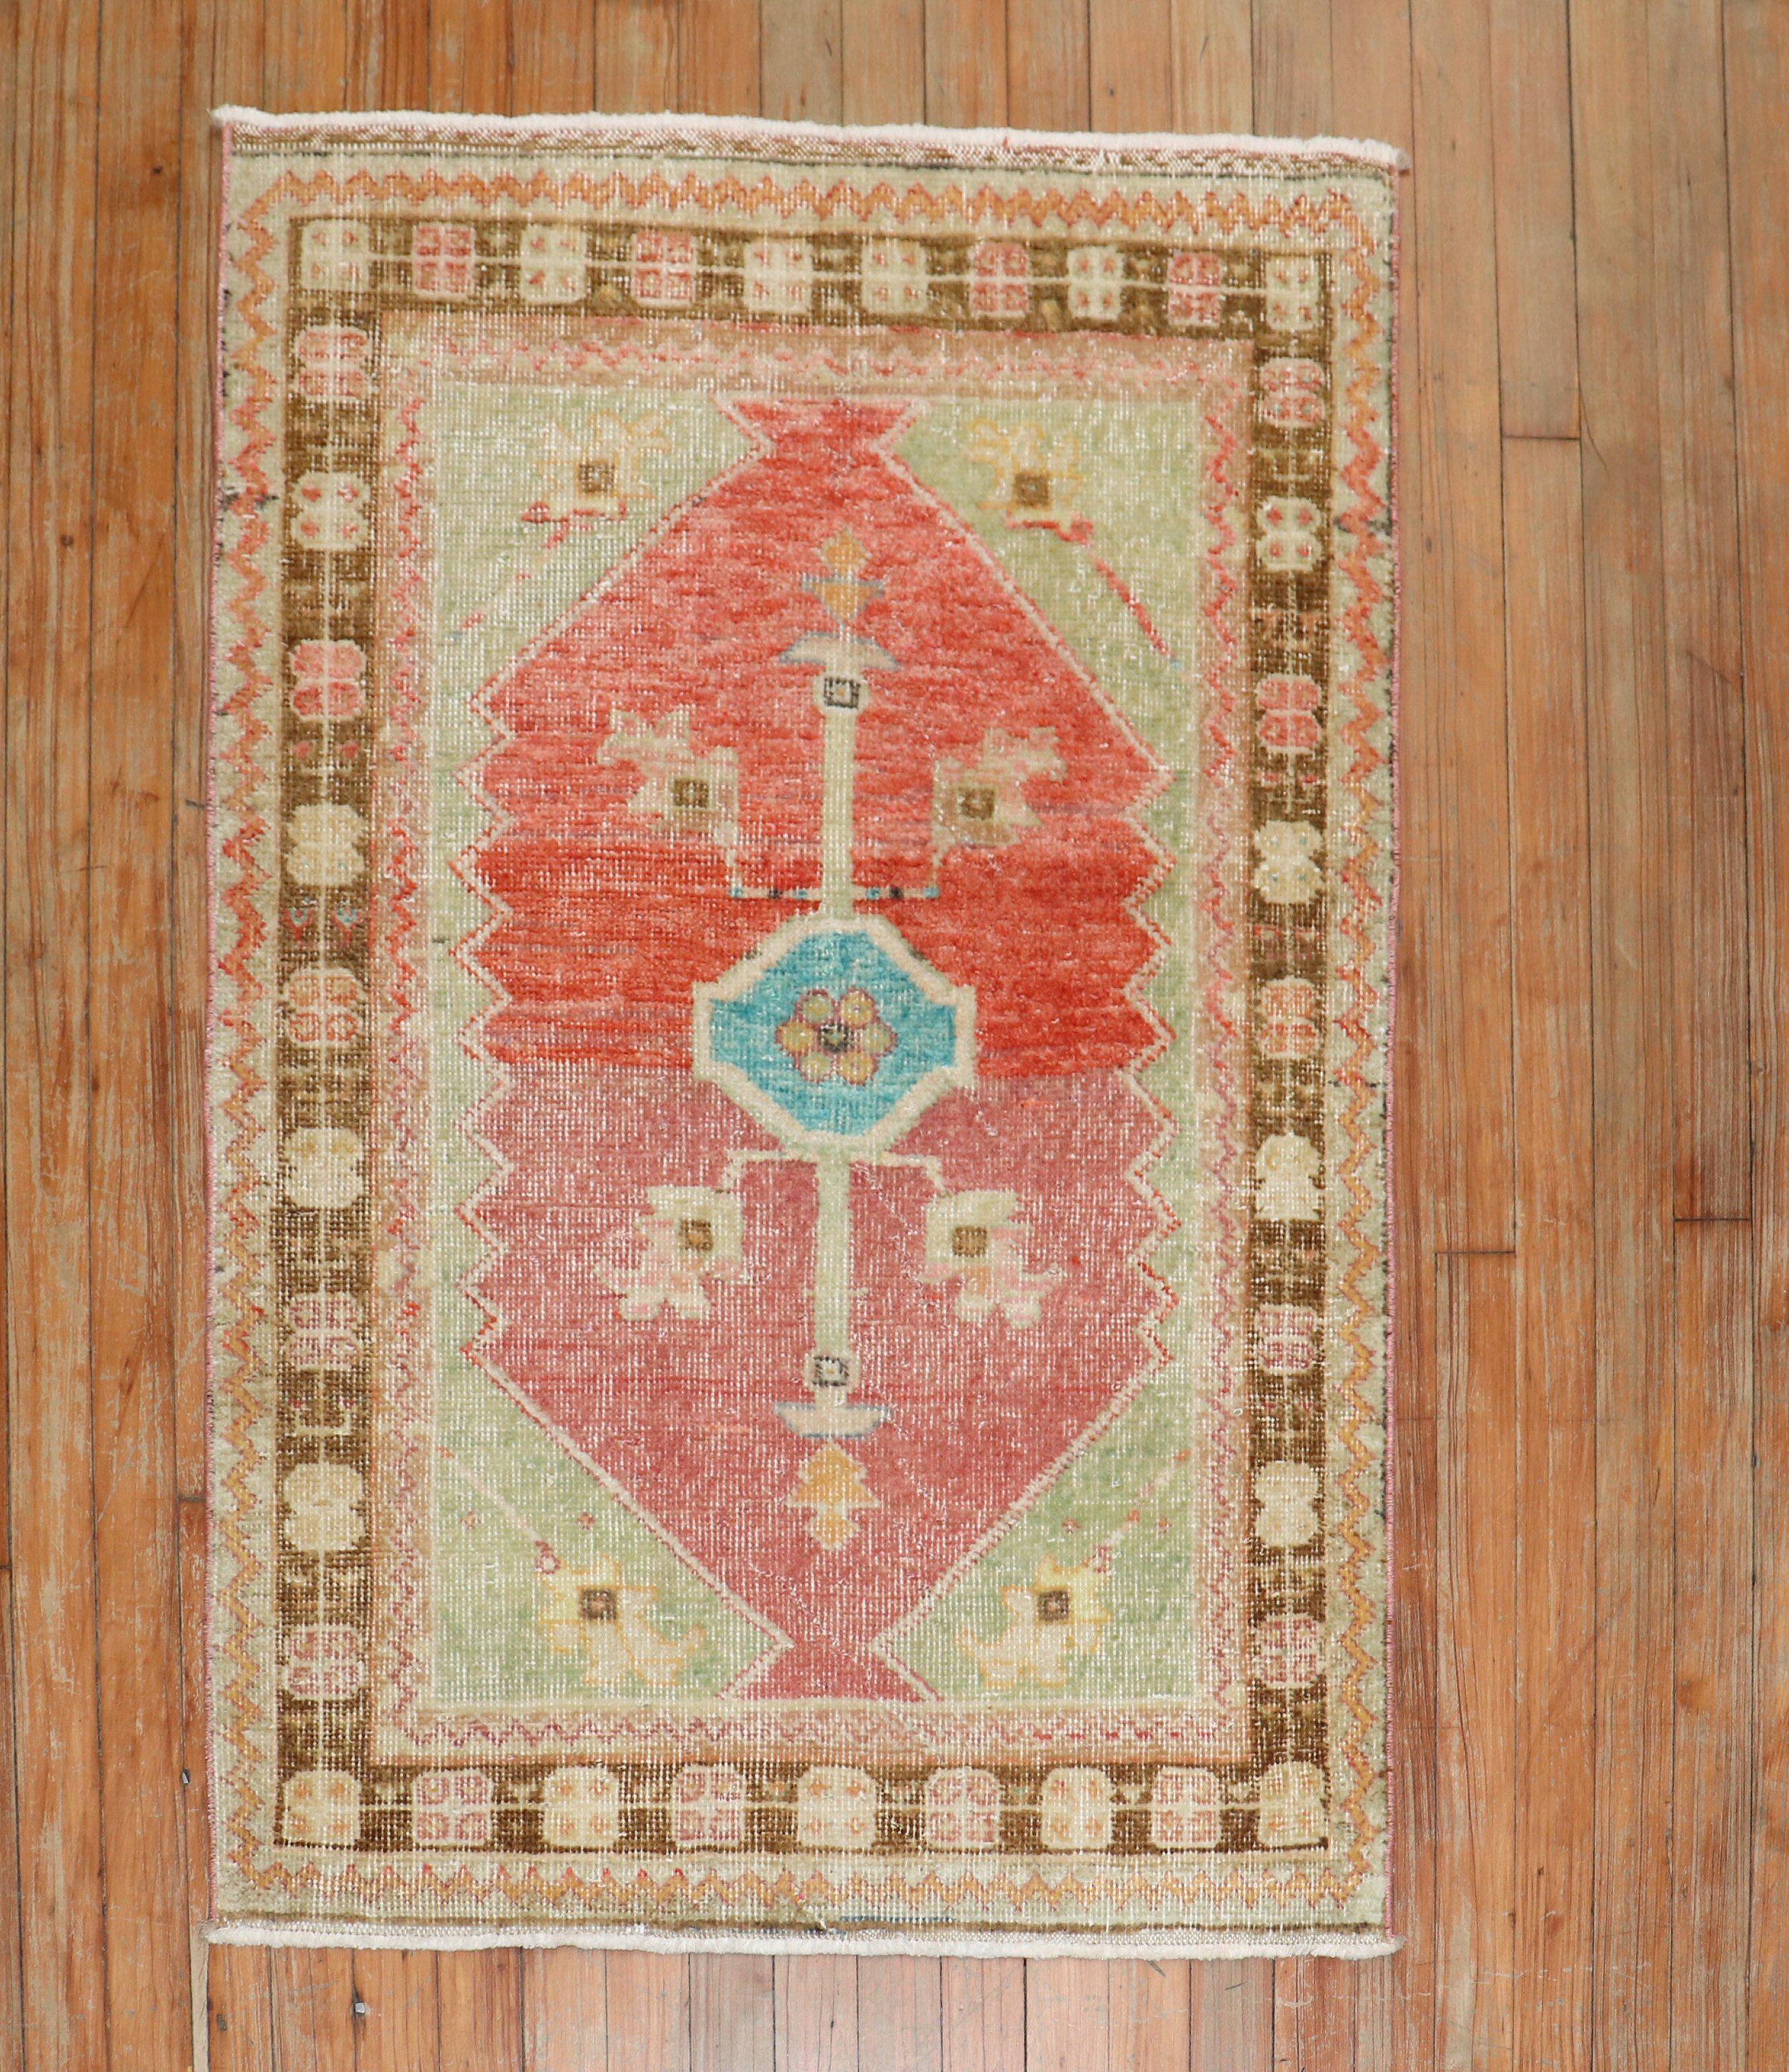 A vintage mid-20th century Anatolian Turkish rug scatter size colorful rug

Measures: 2'9' x 3'10